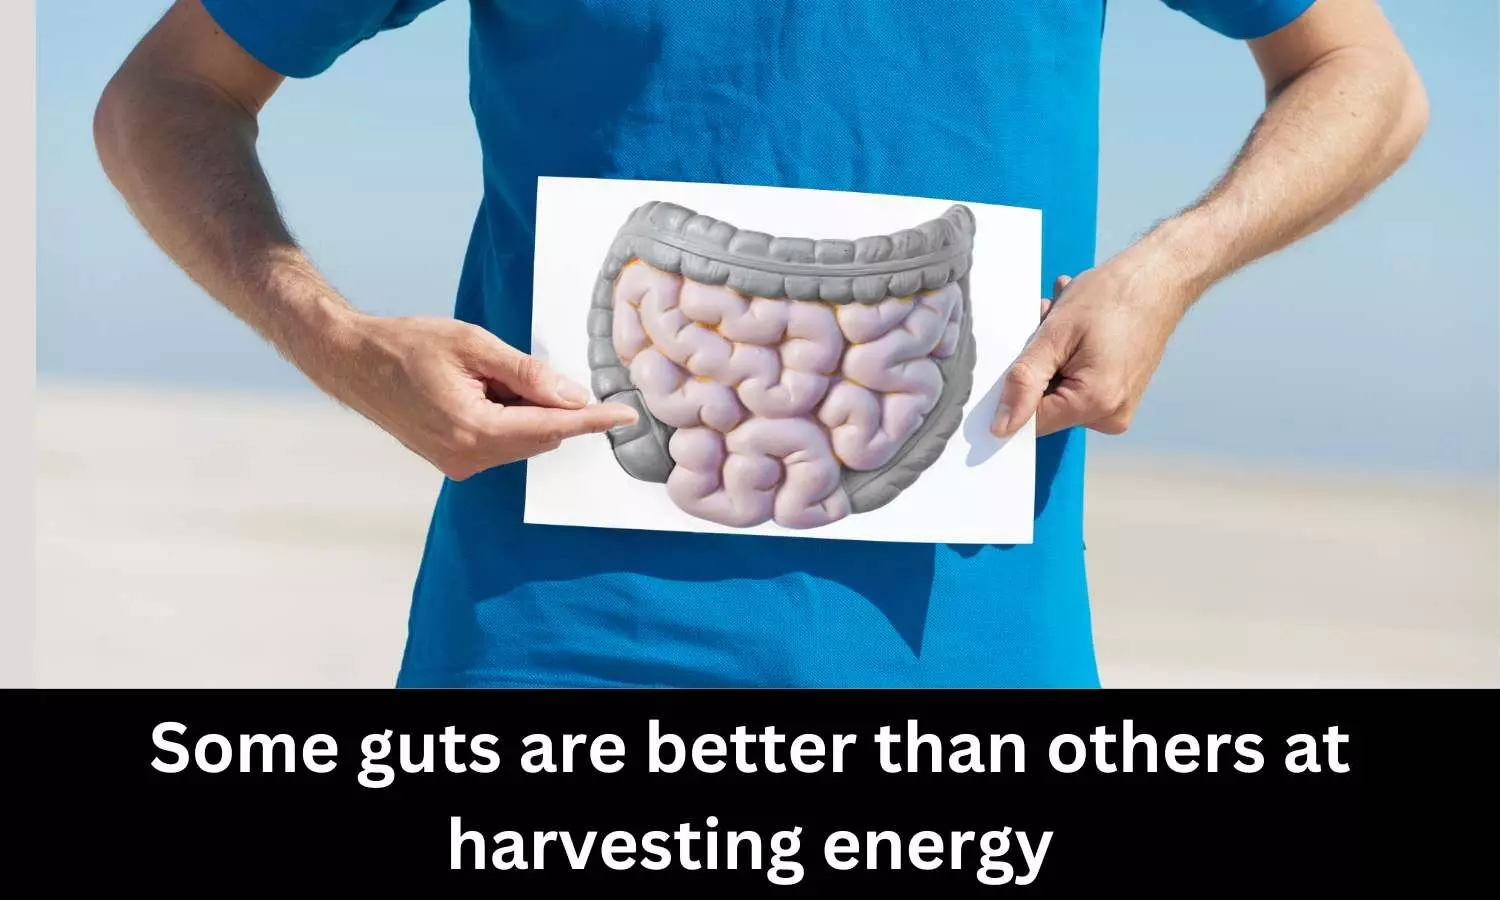 Some guts are better than others at harvesting energy